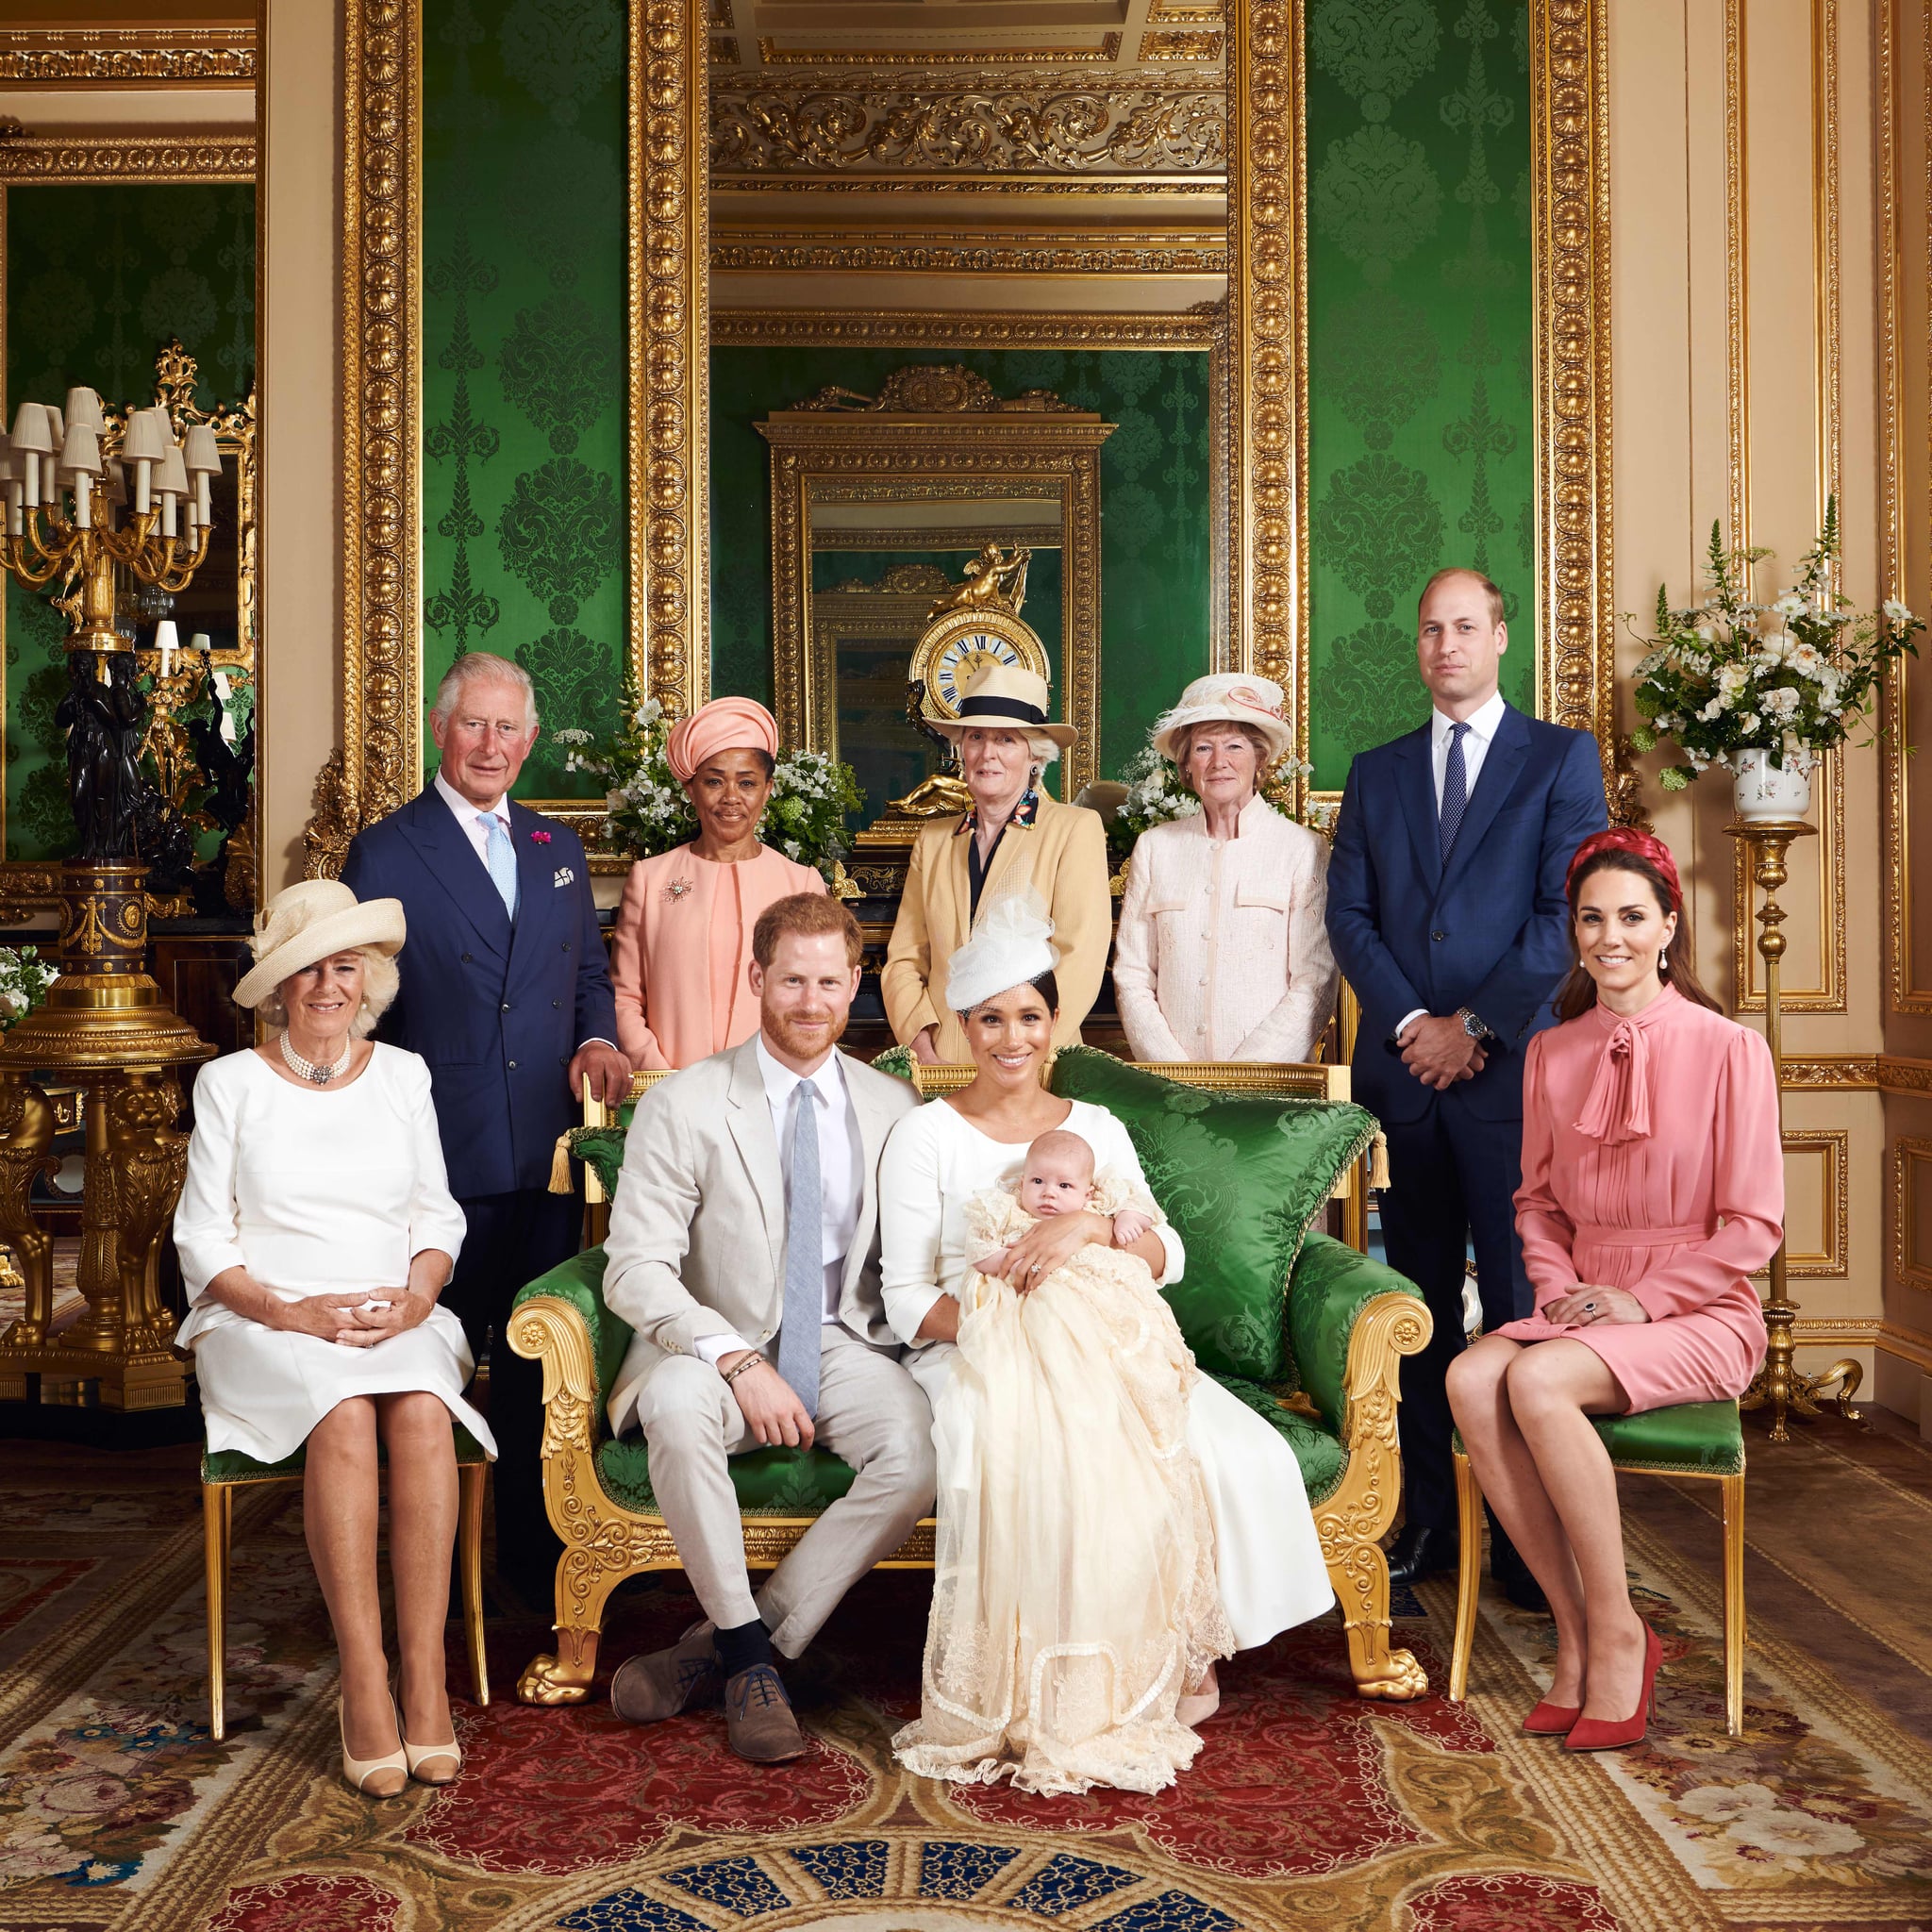 This official handout Christening photograph released by the Duke and Duchess of Sussex shows Britain's Prince Harry, Duke of Sussex (centre left), and his wife Meghan, Duchess of Sussex holding their baby son, Archie Harrison Mountbatten-Windsor flanked by (L-R) Britain's Camilla, Duchess of Cornwall, Britain's Prince Charles, Prince of Wales, Ms Doria Ragland, Lady Jane Fellowes, Lady Sarah McCorquodale, Britain's Prince William, Duke of Cambridge, and Britain's Catherine, Duchess of Cambridge in the Green Drawing Room at Windsor Castle, west of London on July 6, 2019. - Prince Harry and his wife Meghan had their baby son Archie christened on Saturday at a private ceremony. (Photo by Chris ALLERTON / SUSSEXROYAL / AFP) / XGTY / RESTRICTED TO EDITORIAL USE - MANDATORY CREDIT 